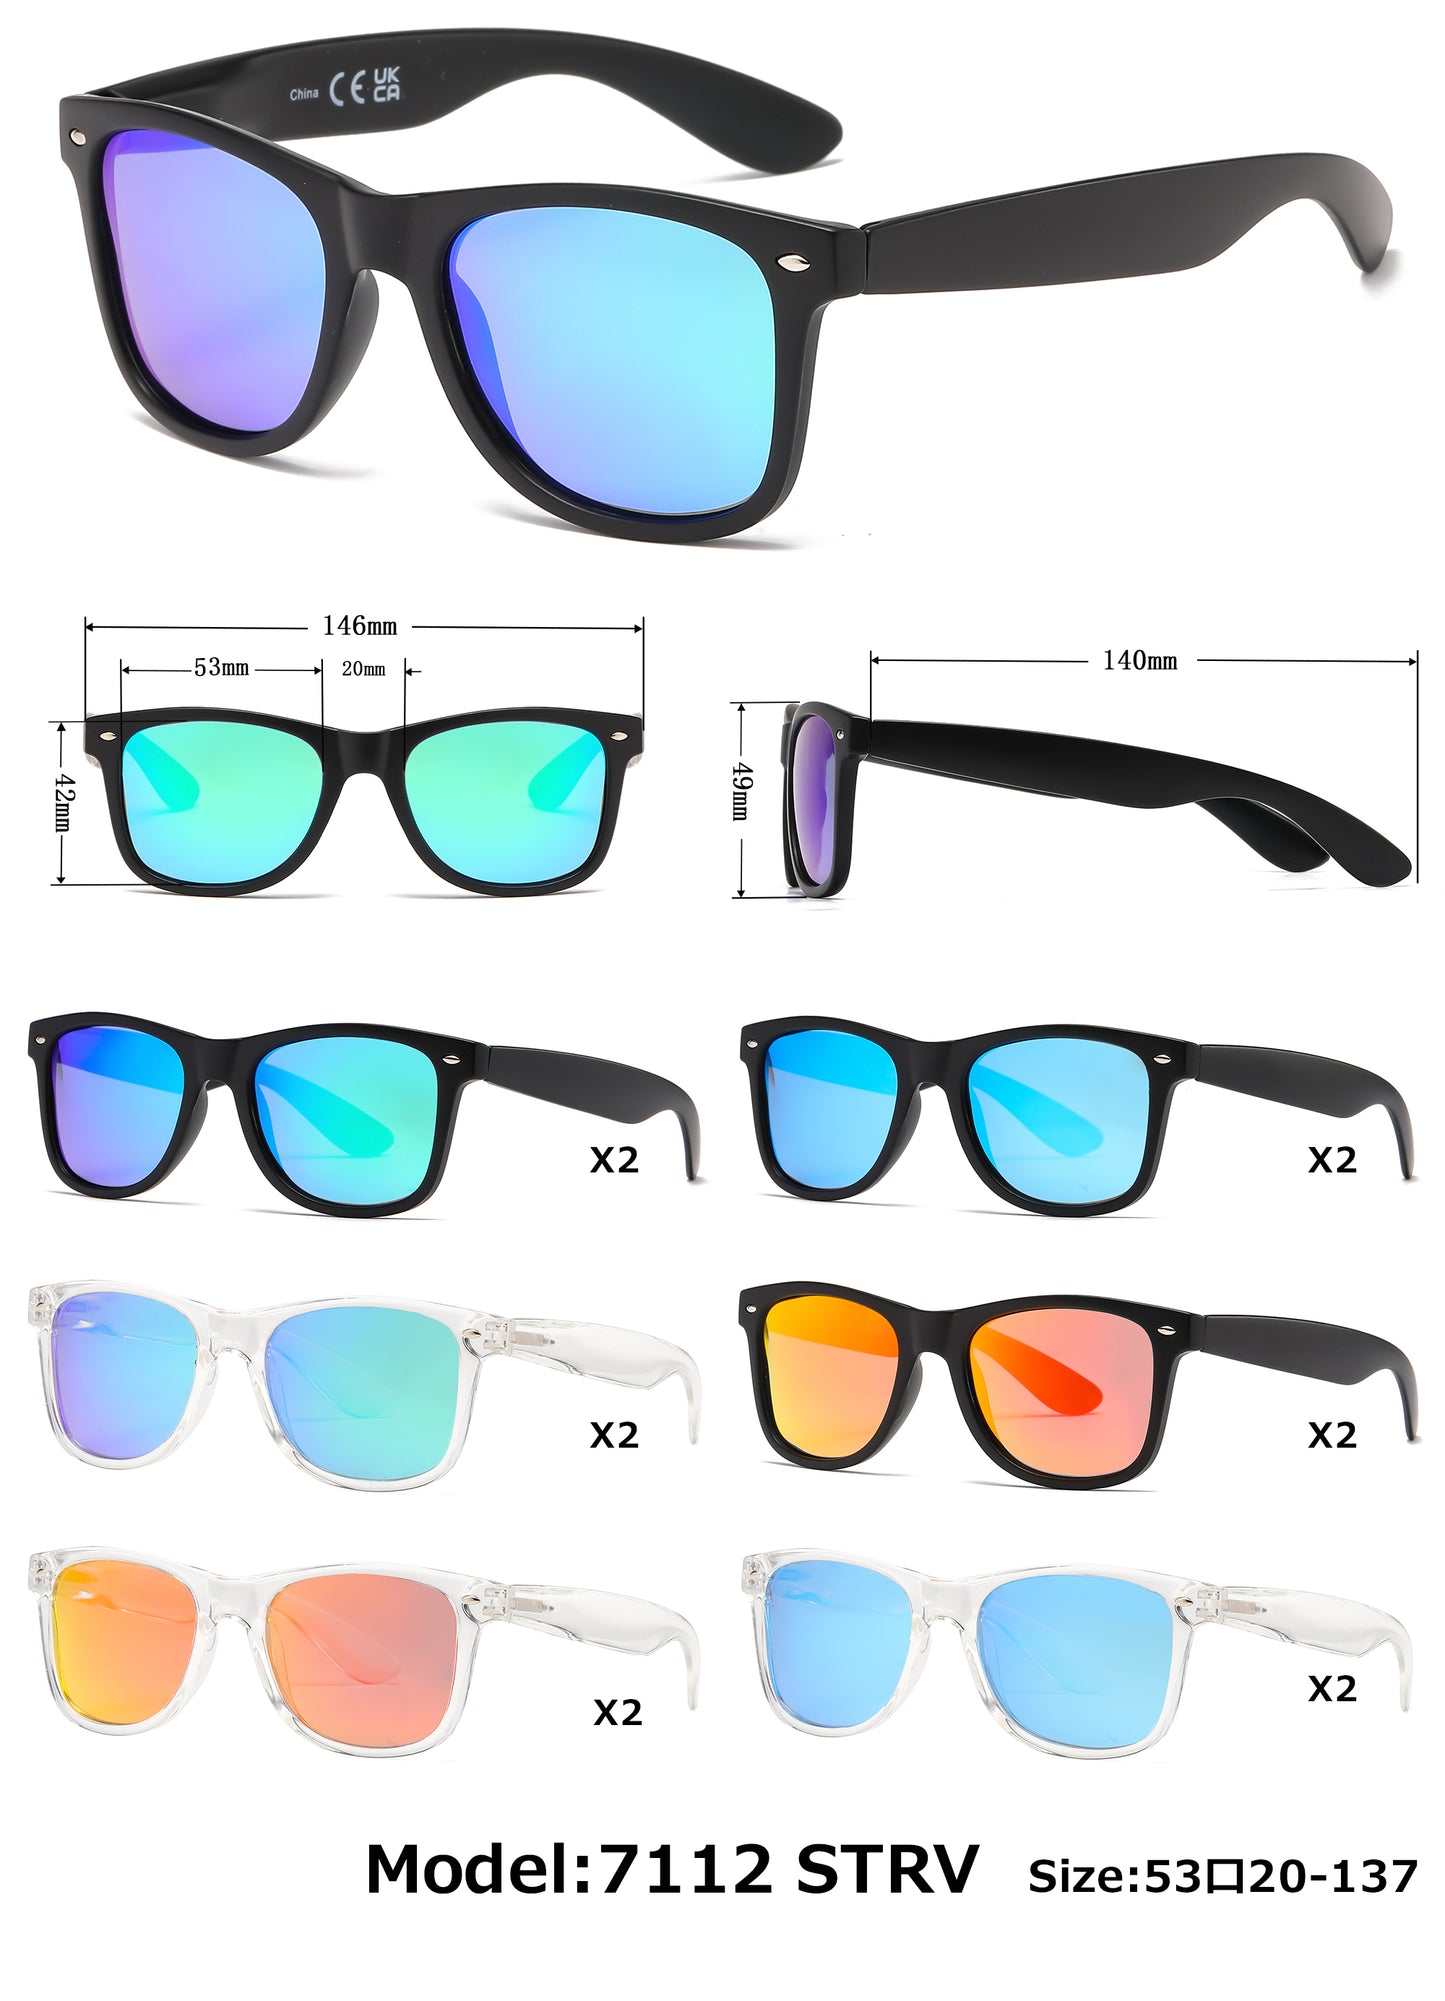 7112 ST RVC - Spring Hinge Plastic Sunglasses with Color Mirror Lens